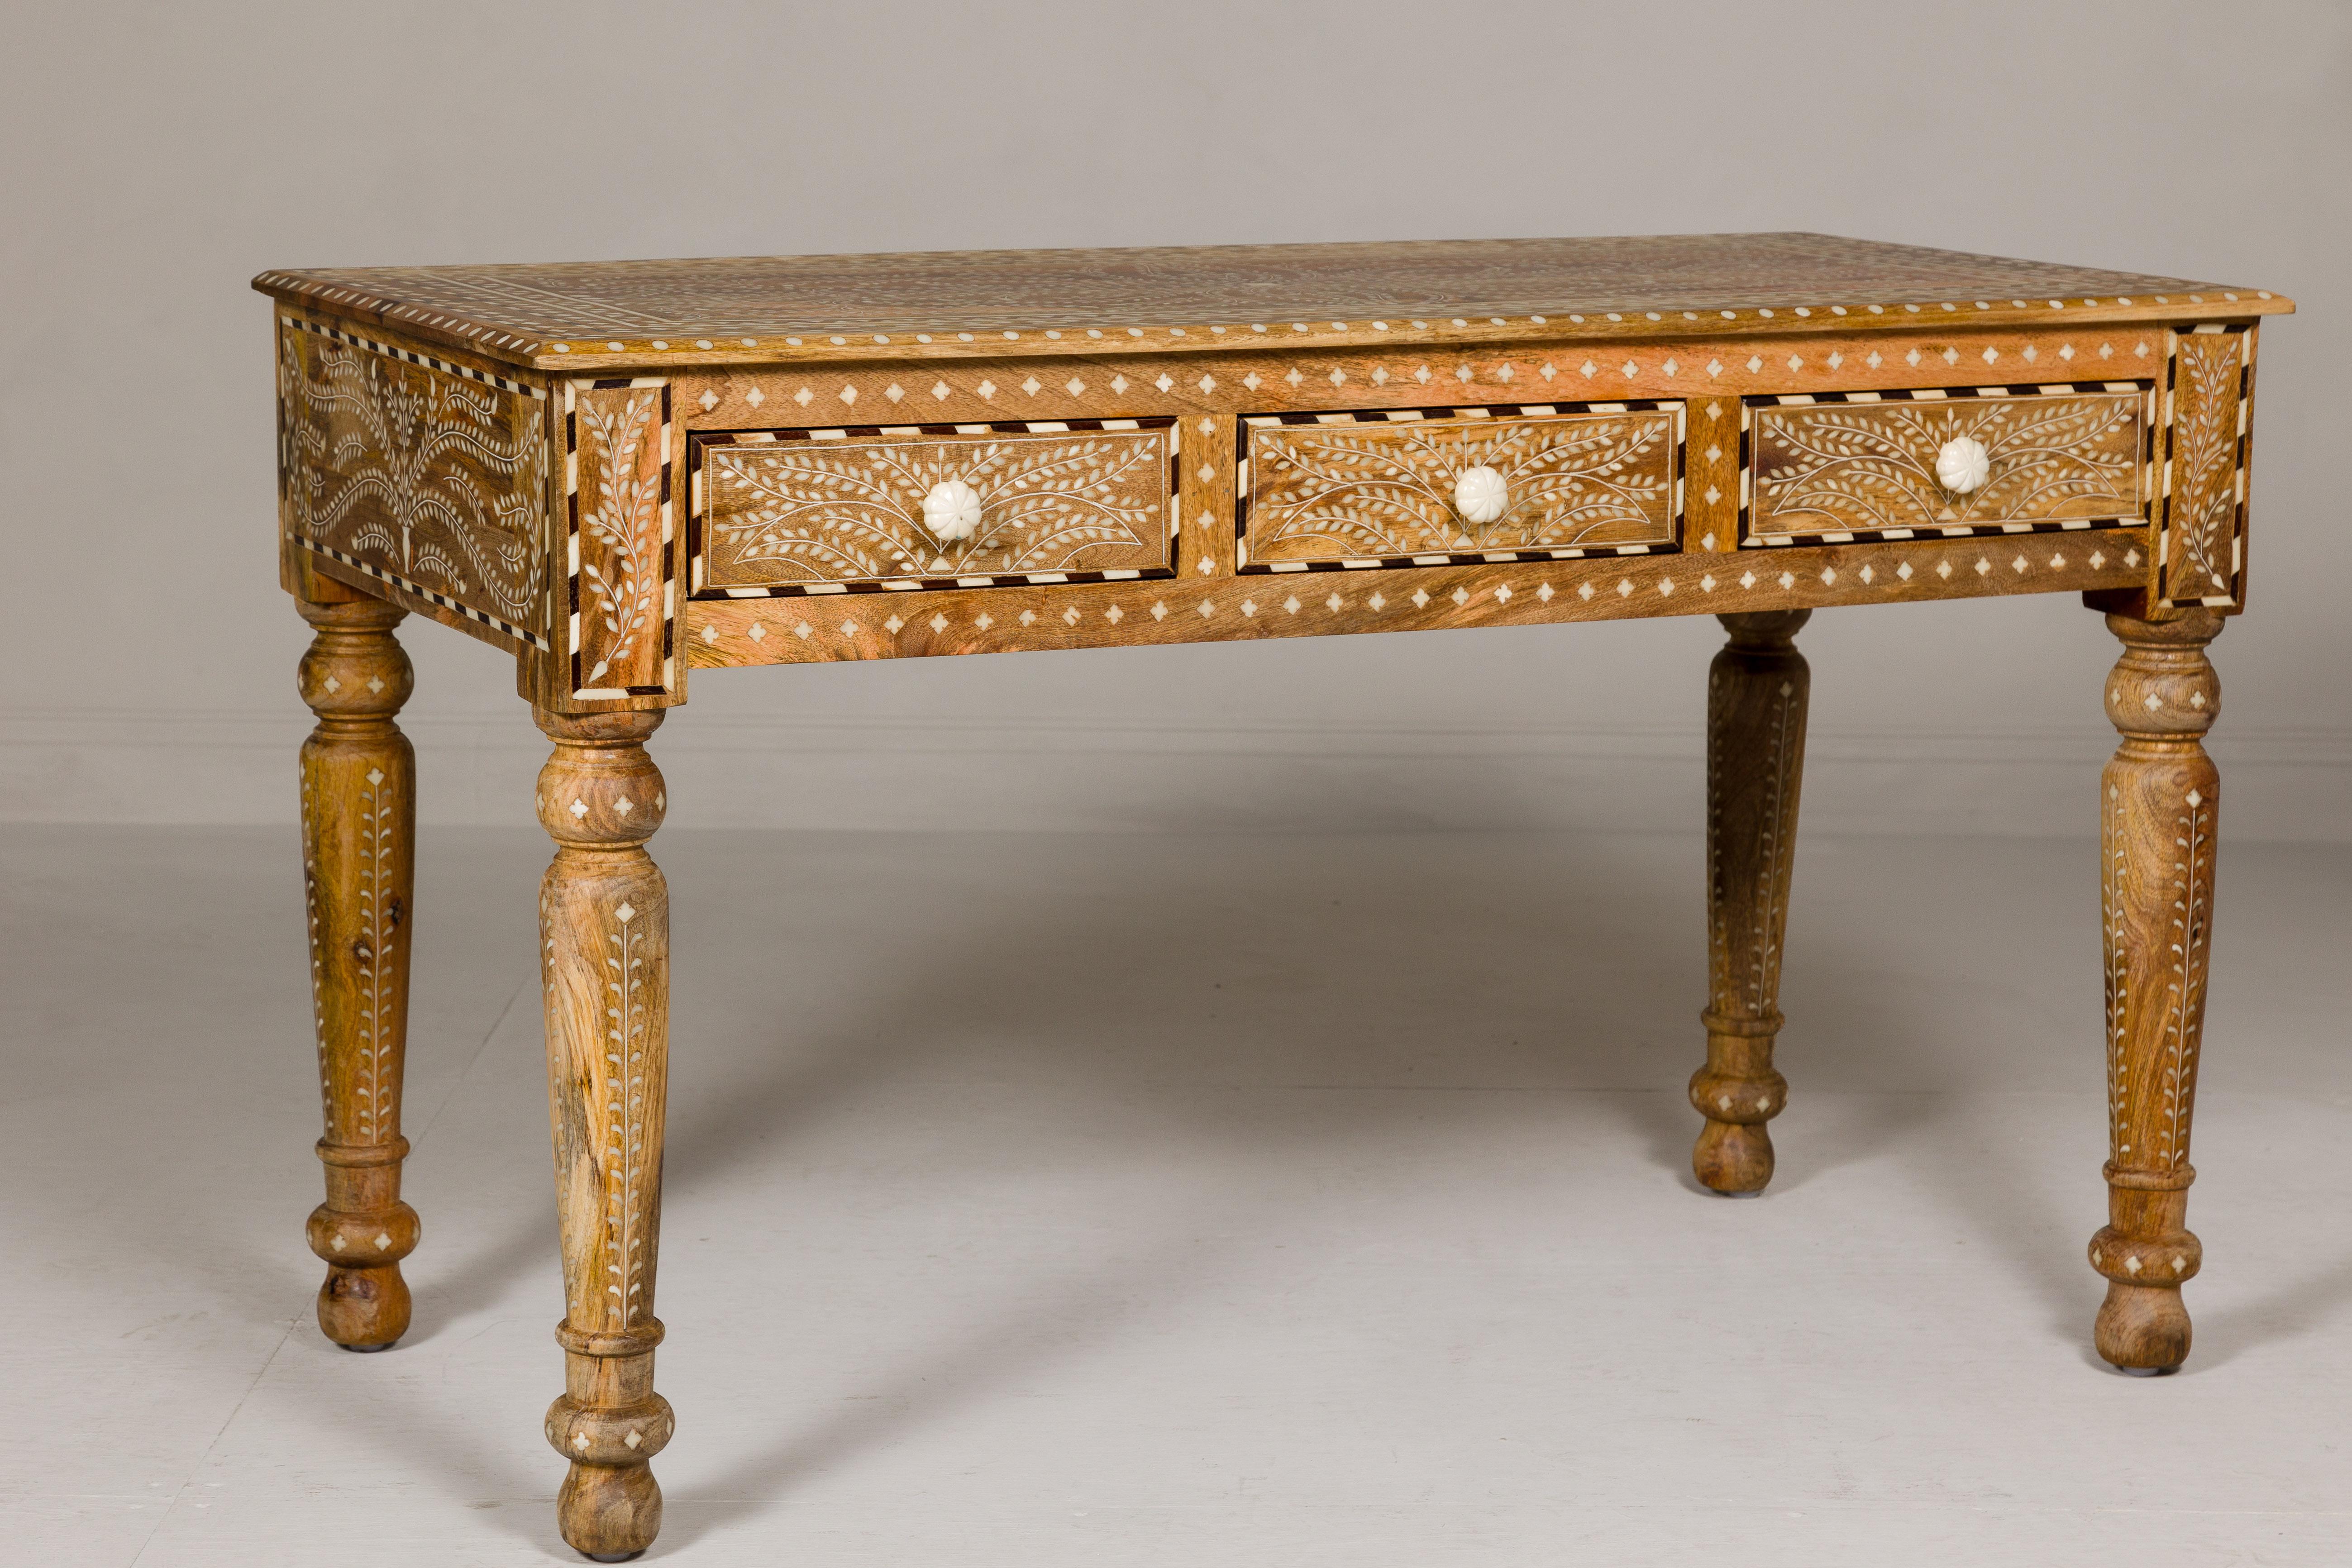 Anglo Indian Style Mango Wood Desk with Drawers, Bone Inlay and Light Patina For Sale 6